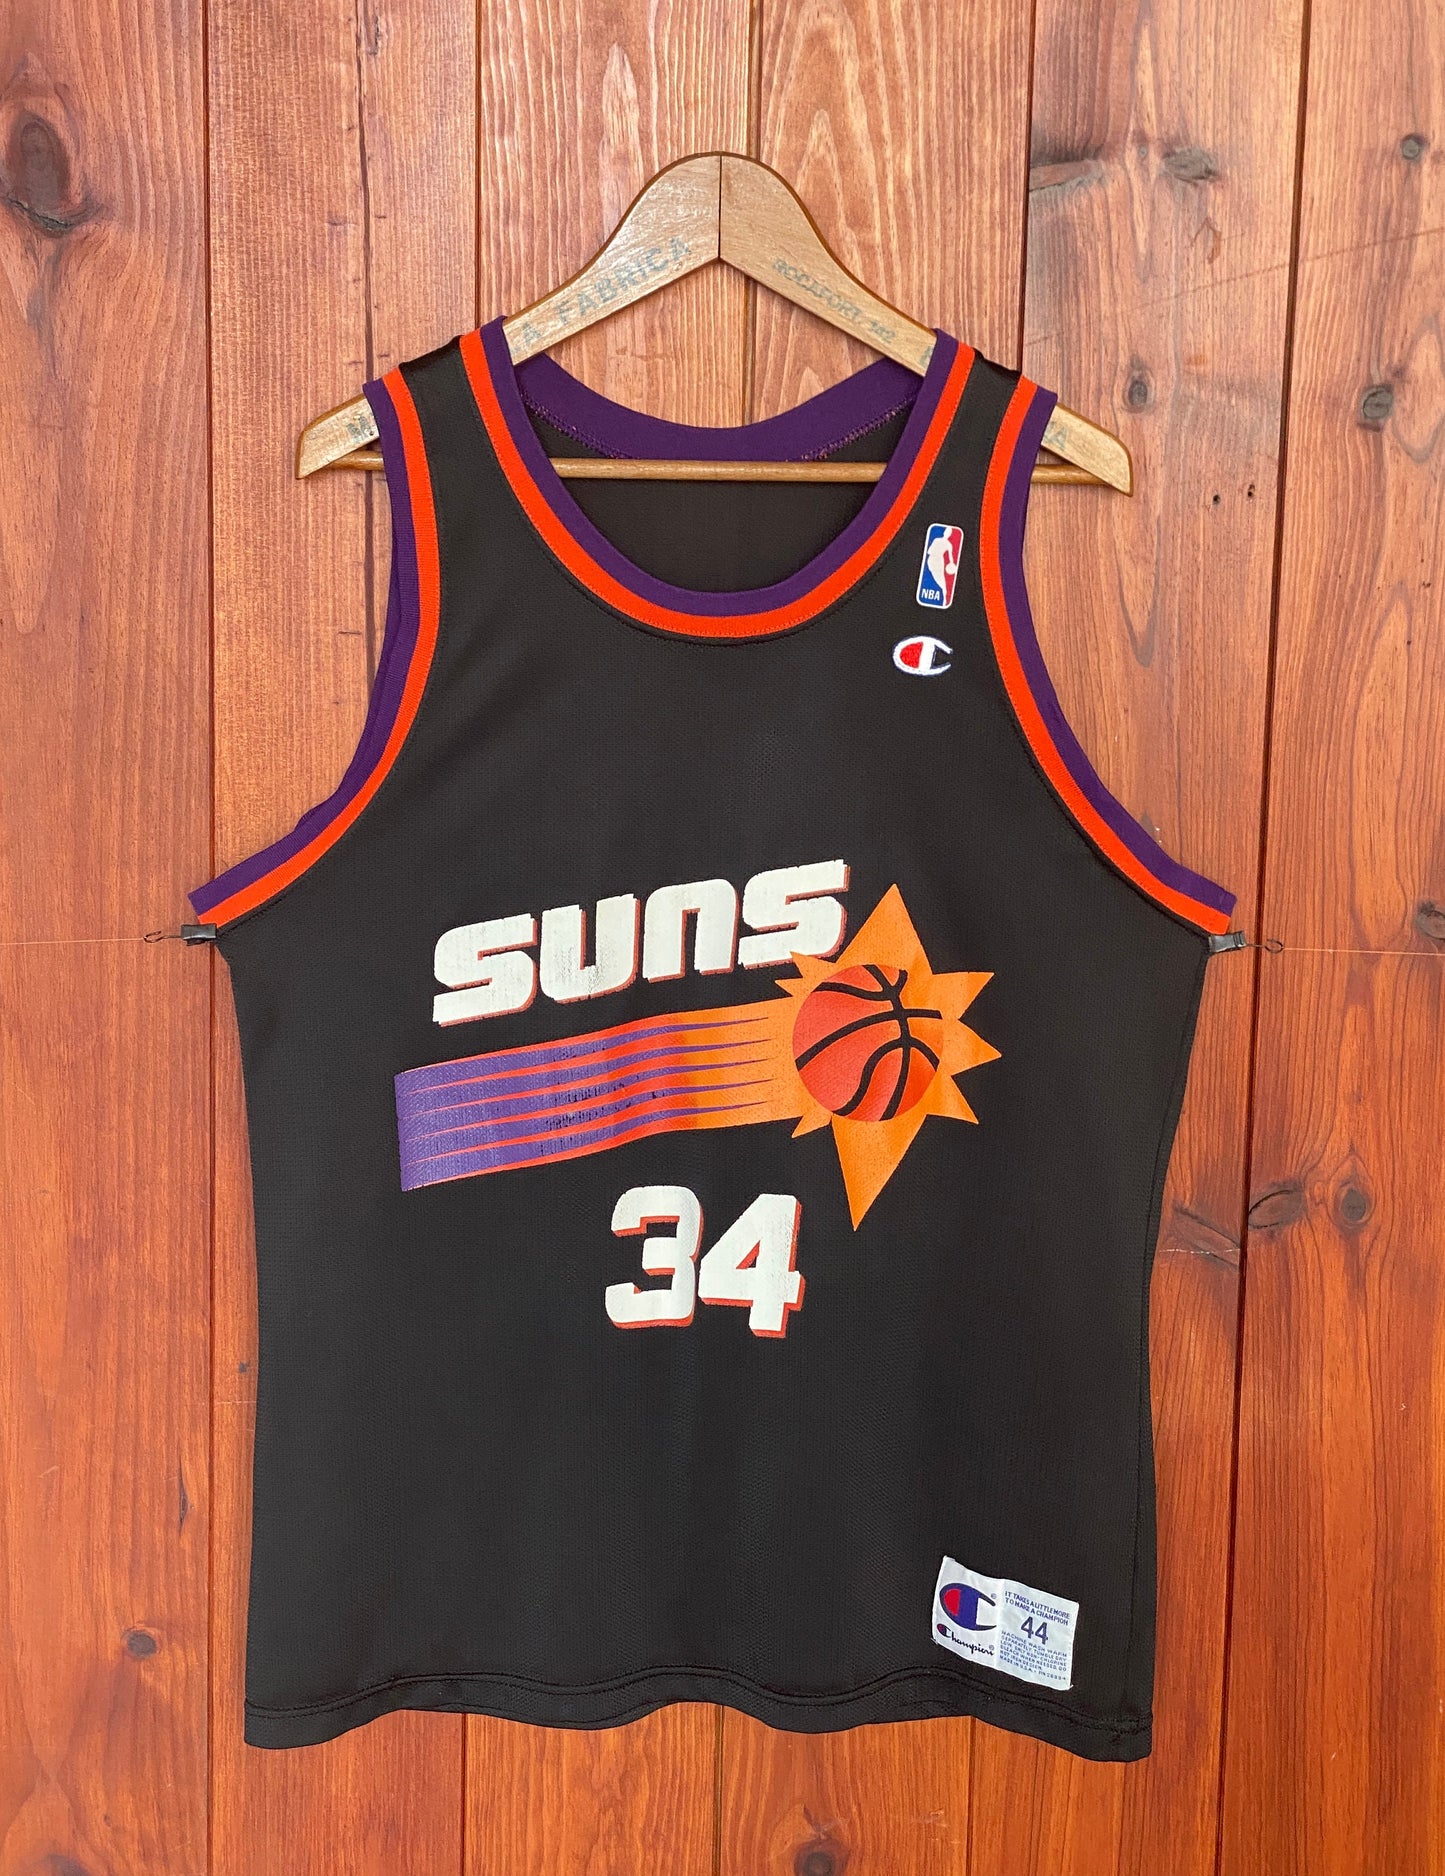 Vintage 90s NBA Phoenix Suns Charles Barkley #34 Jersey - Size 44, Made in USA by Champion